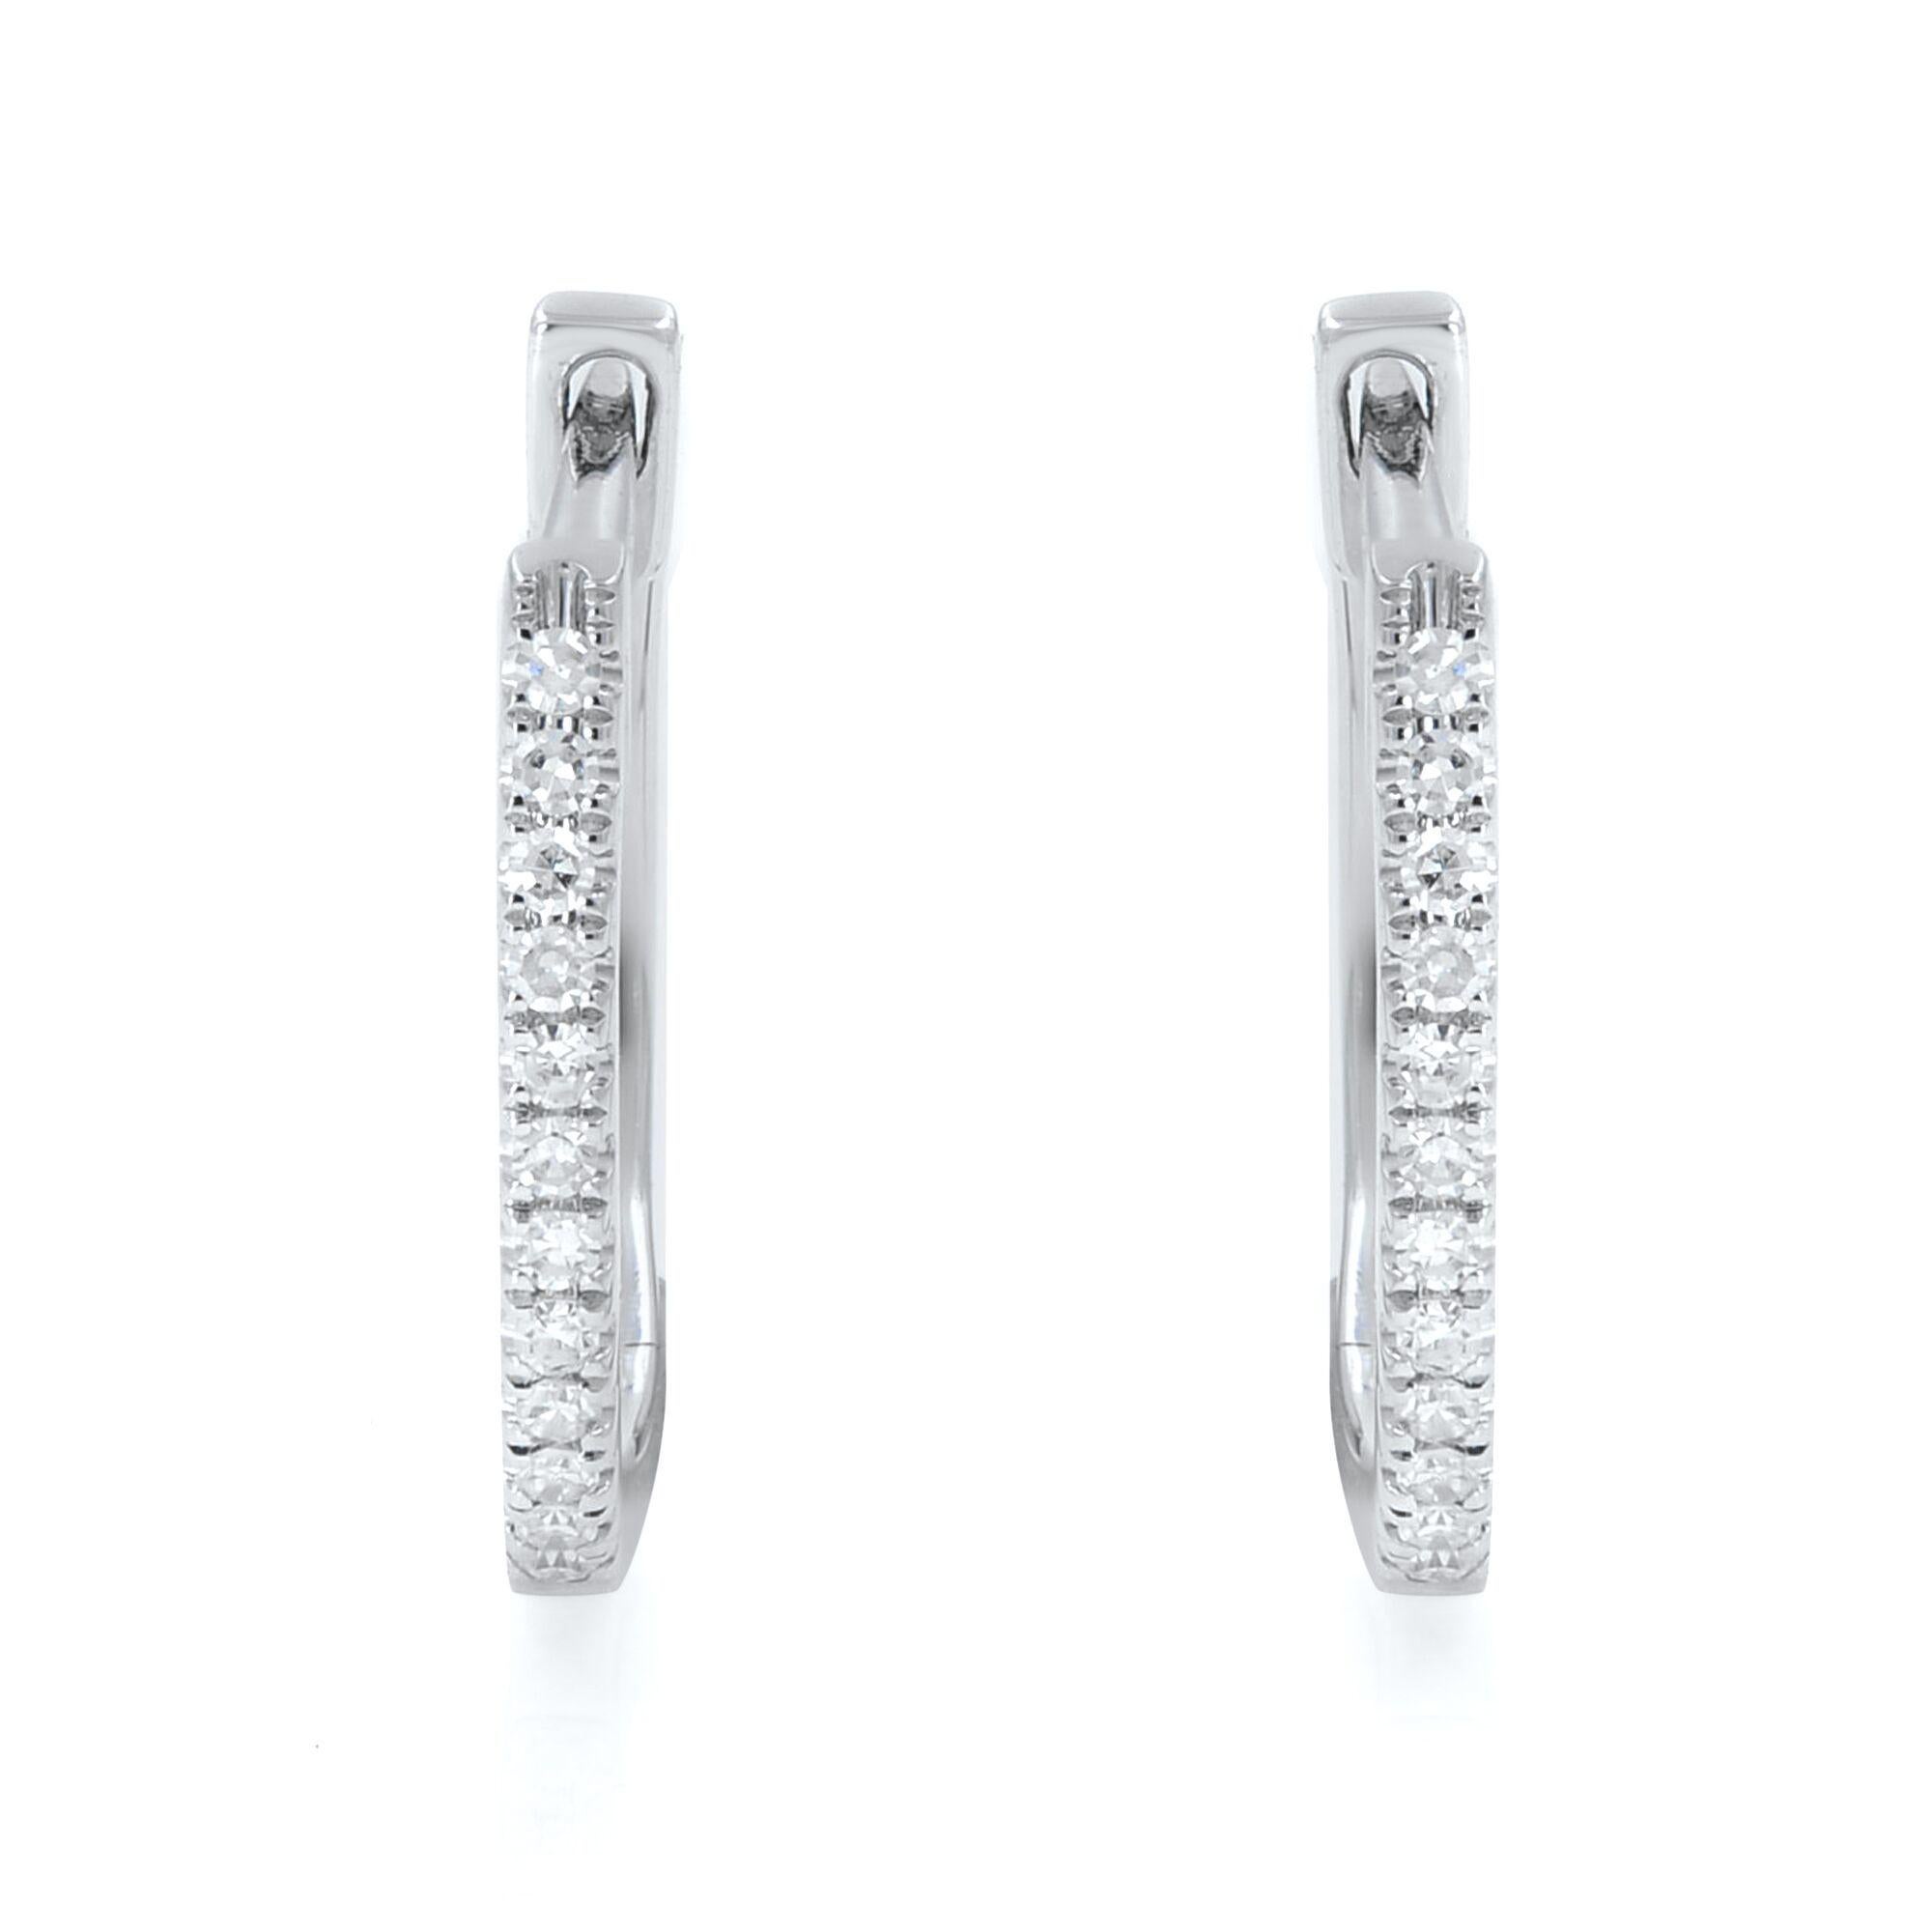 Sleek and classic, a timeless pair of diamond huggie hoop earrings, perfect for a great everyday look. These hoop earrings are crafted in 14K white gold and encrusted with round cut diamonds weighing 0.08 carat. Diamond color G-H and clarity VS-SI.